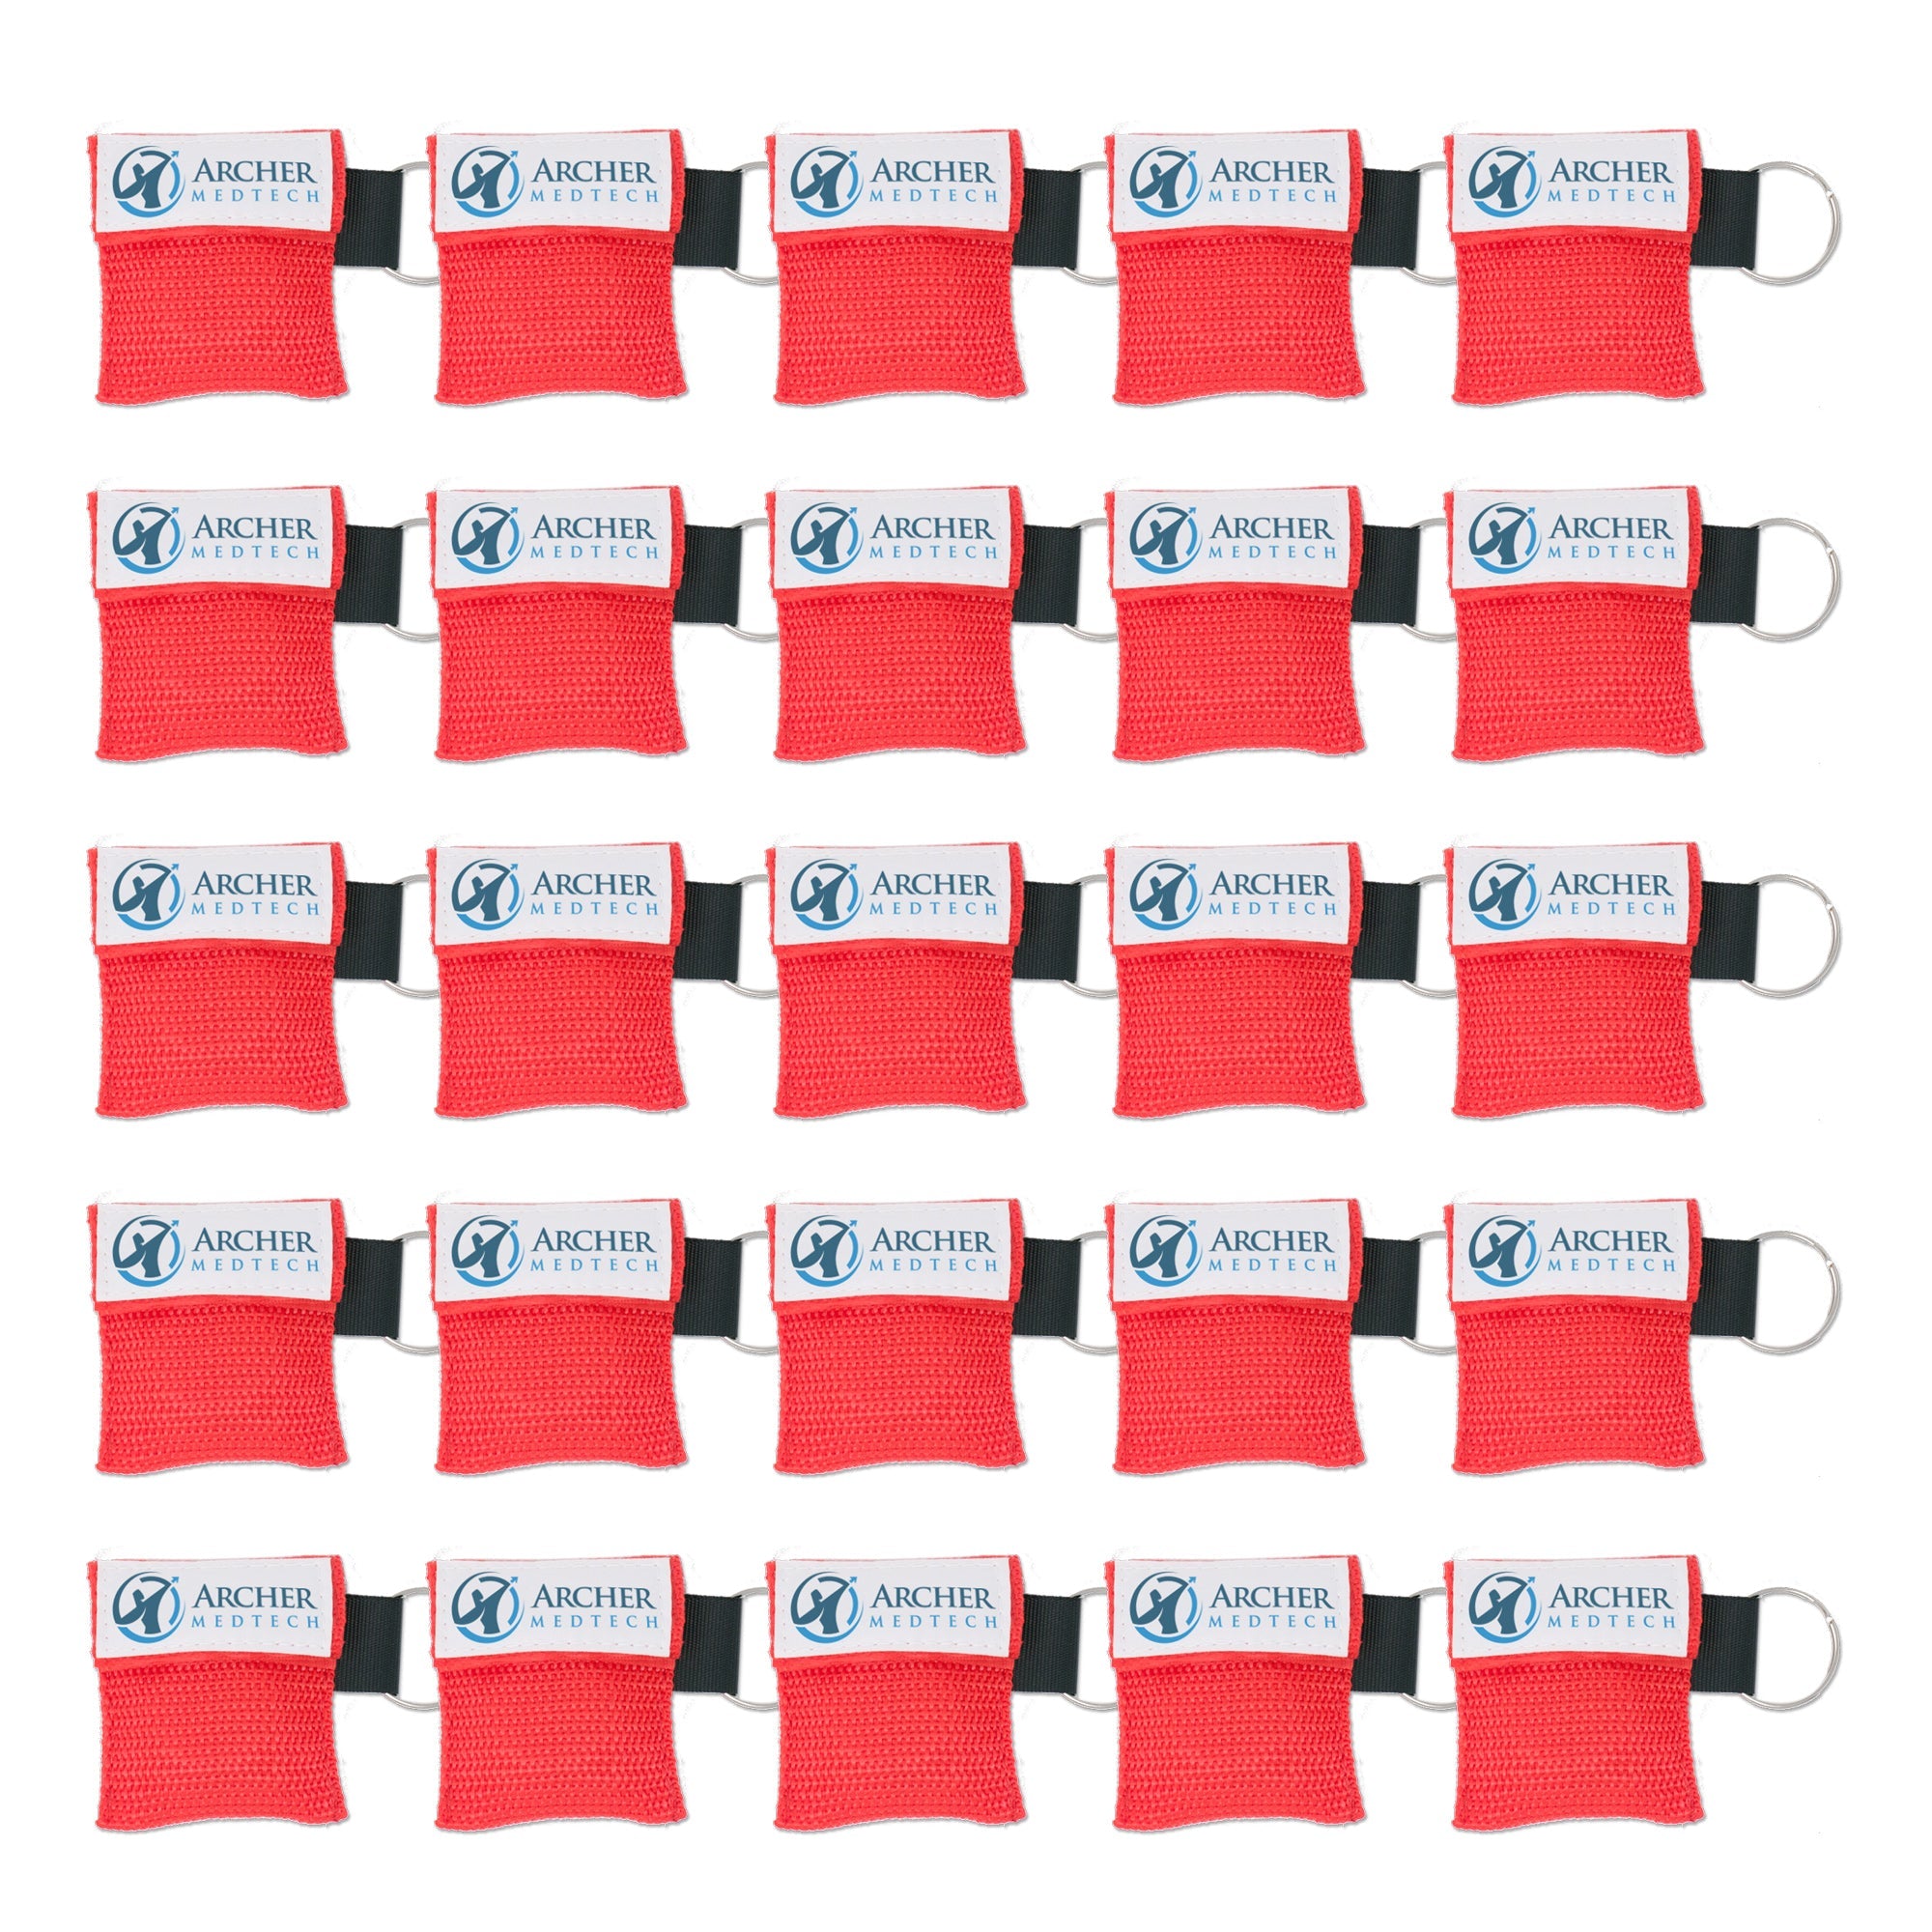 ASA TECHMED CPR Face Mask Key Chain Kit With Gloves - 25 Pack, Red 